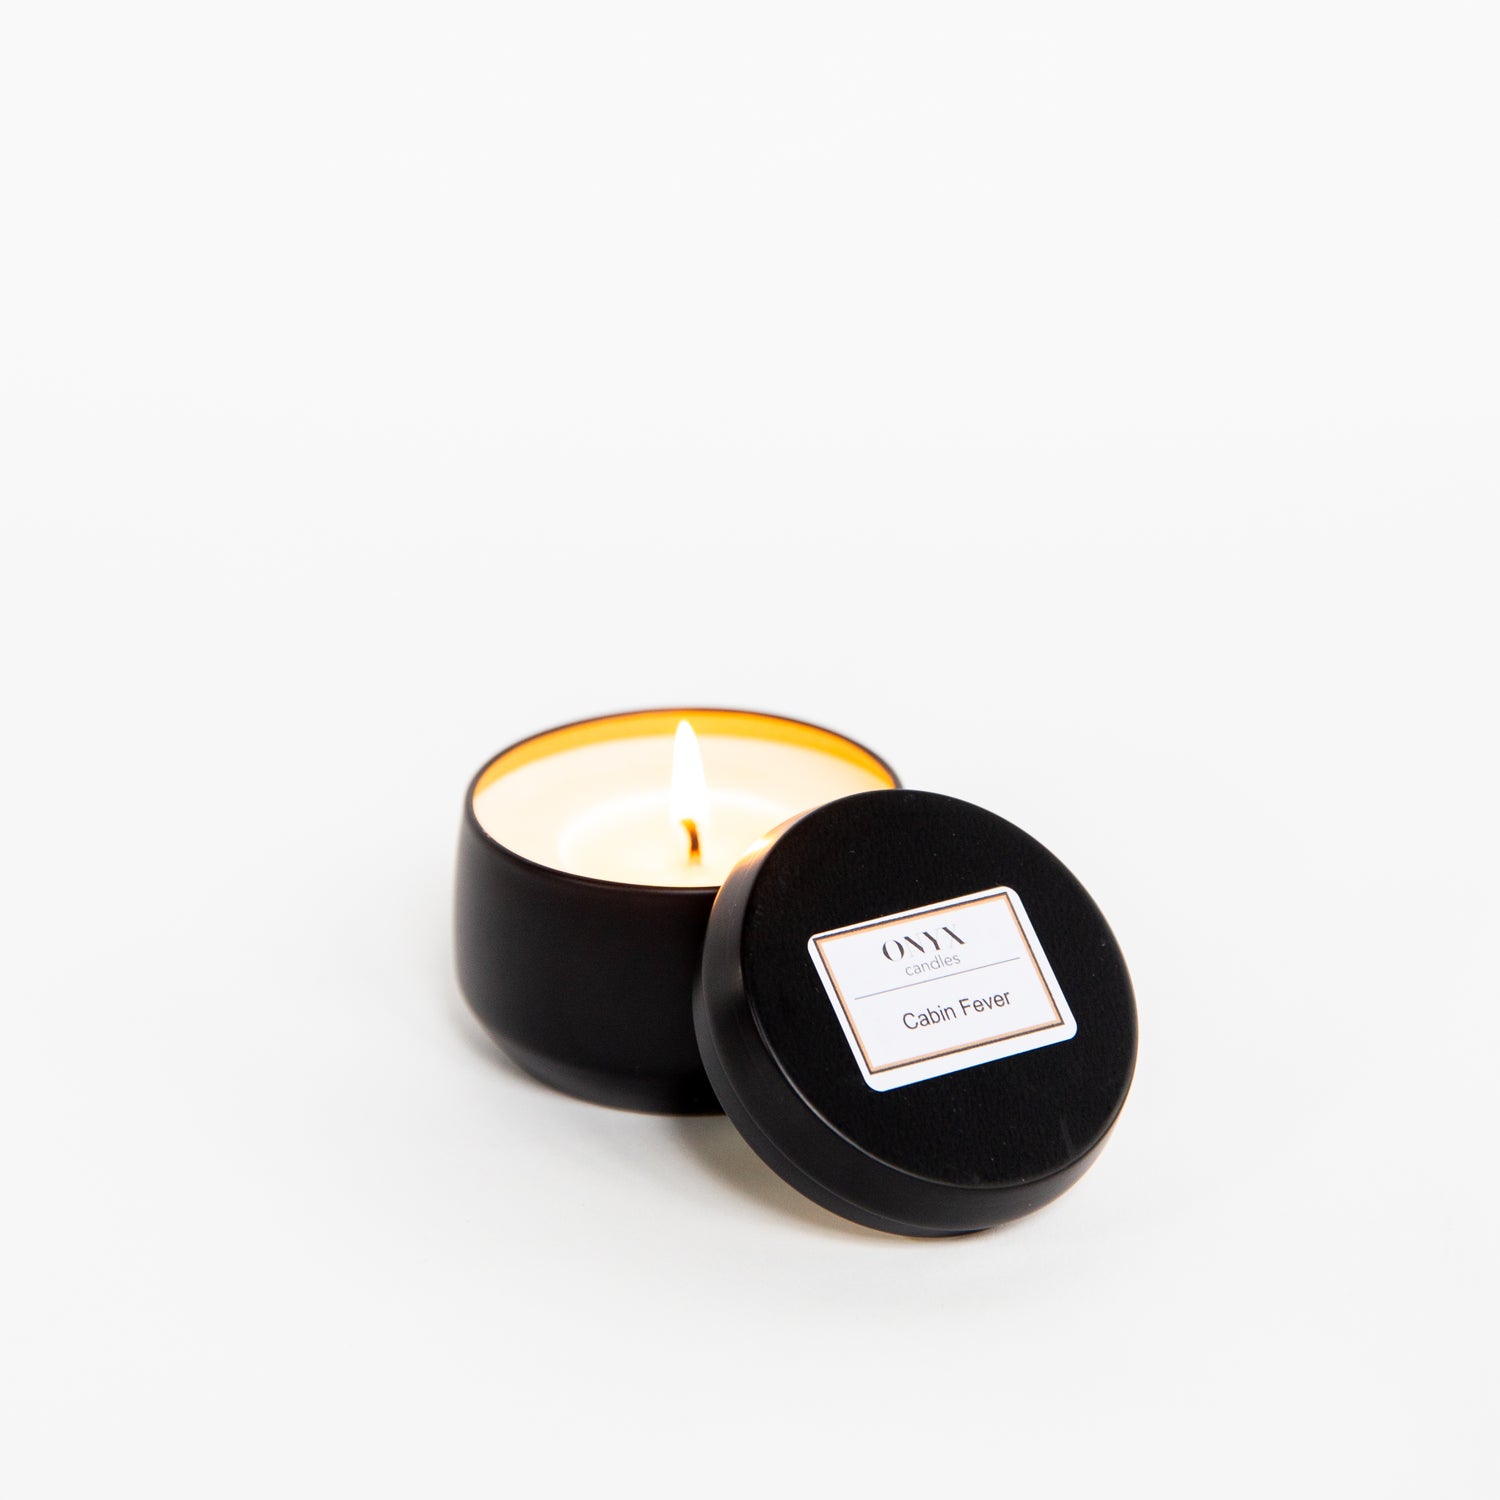 Onyx candles 4 oz matte black tin candle burns brightly, scented in Cabin Fever